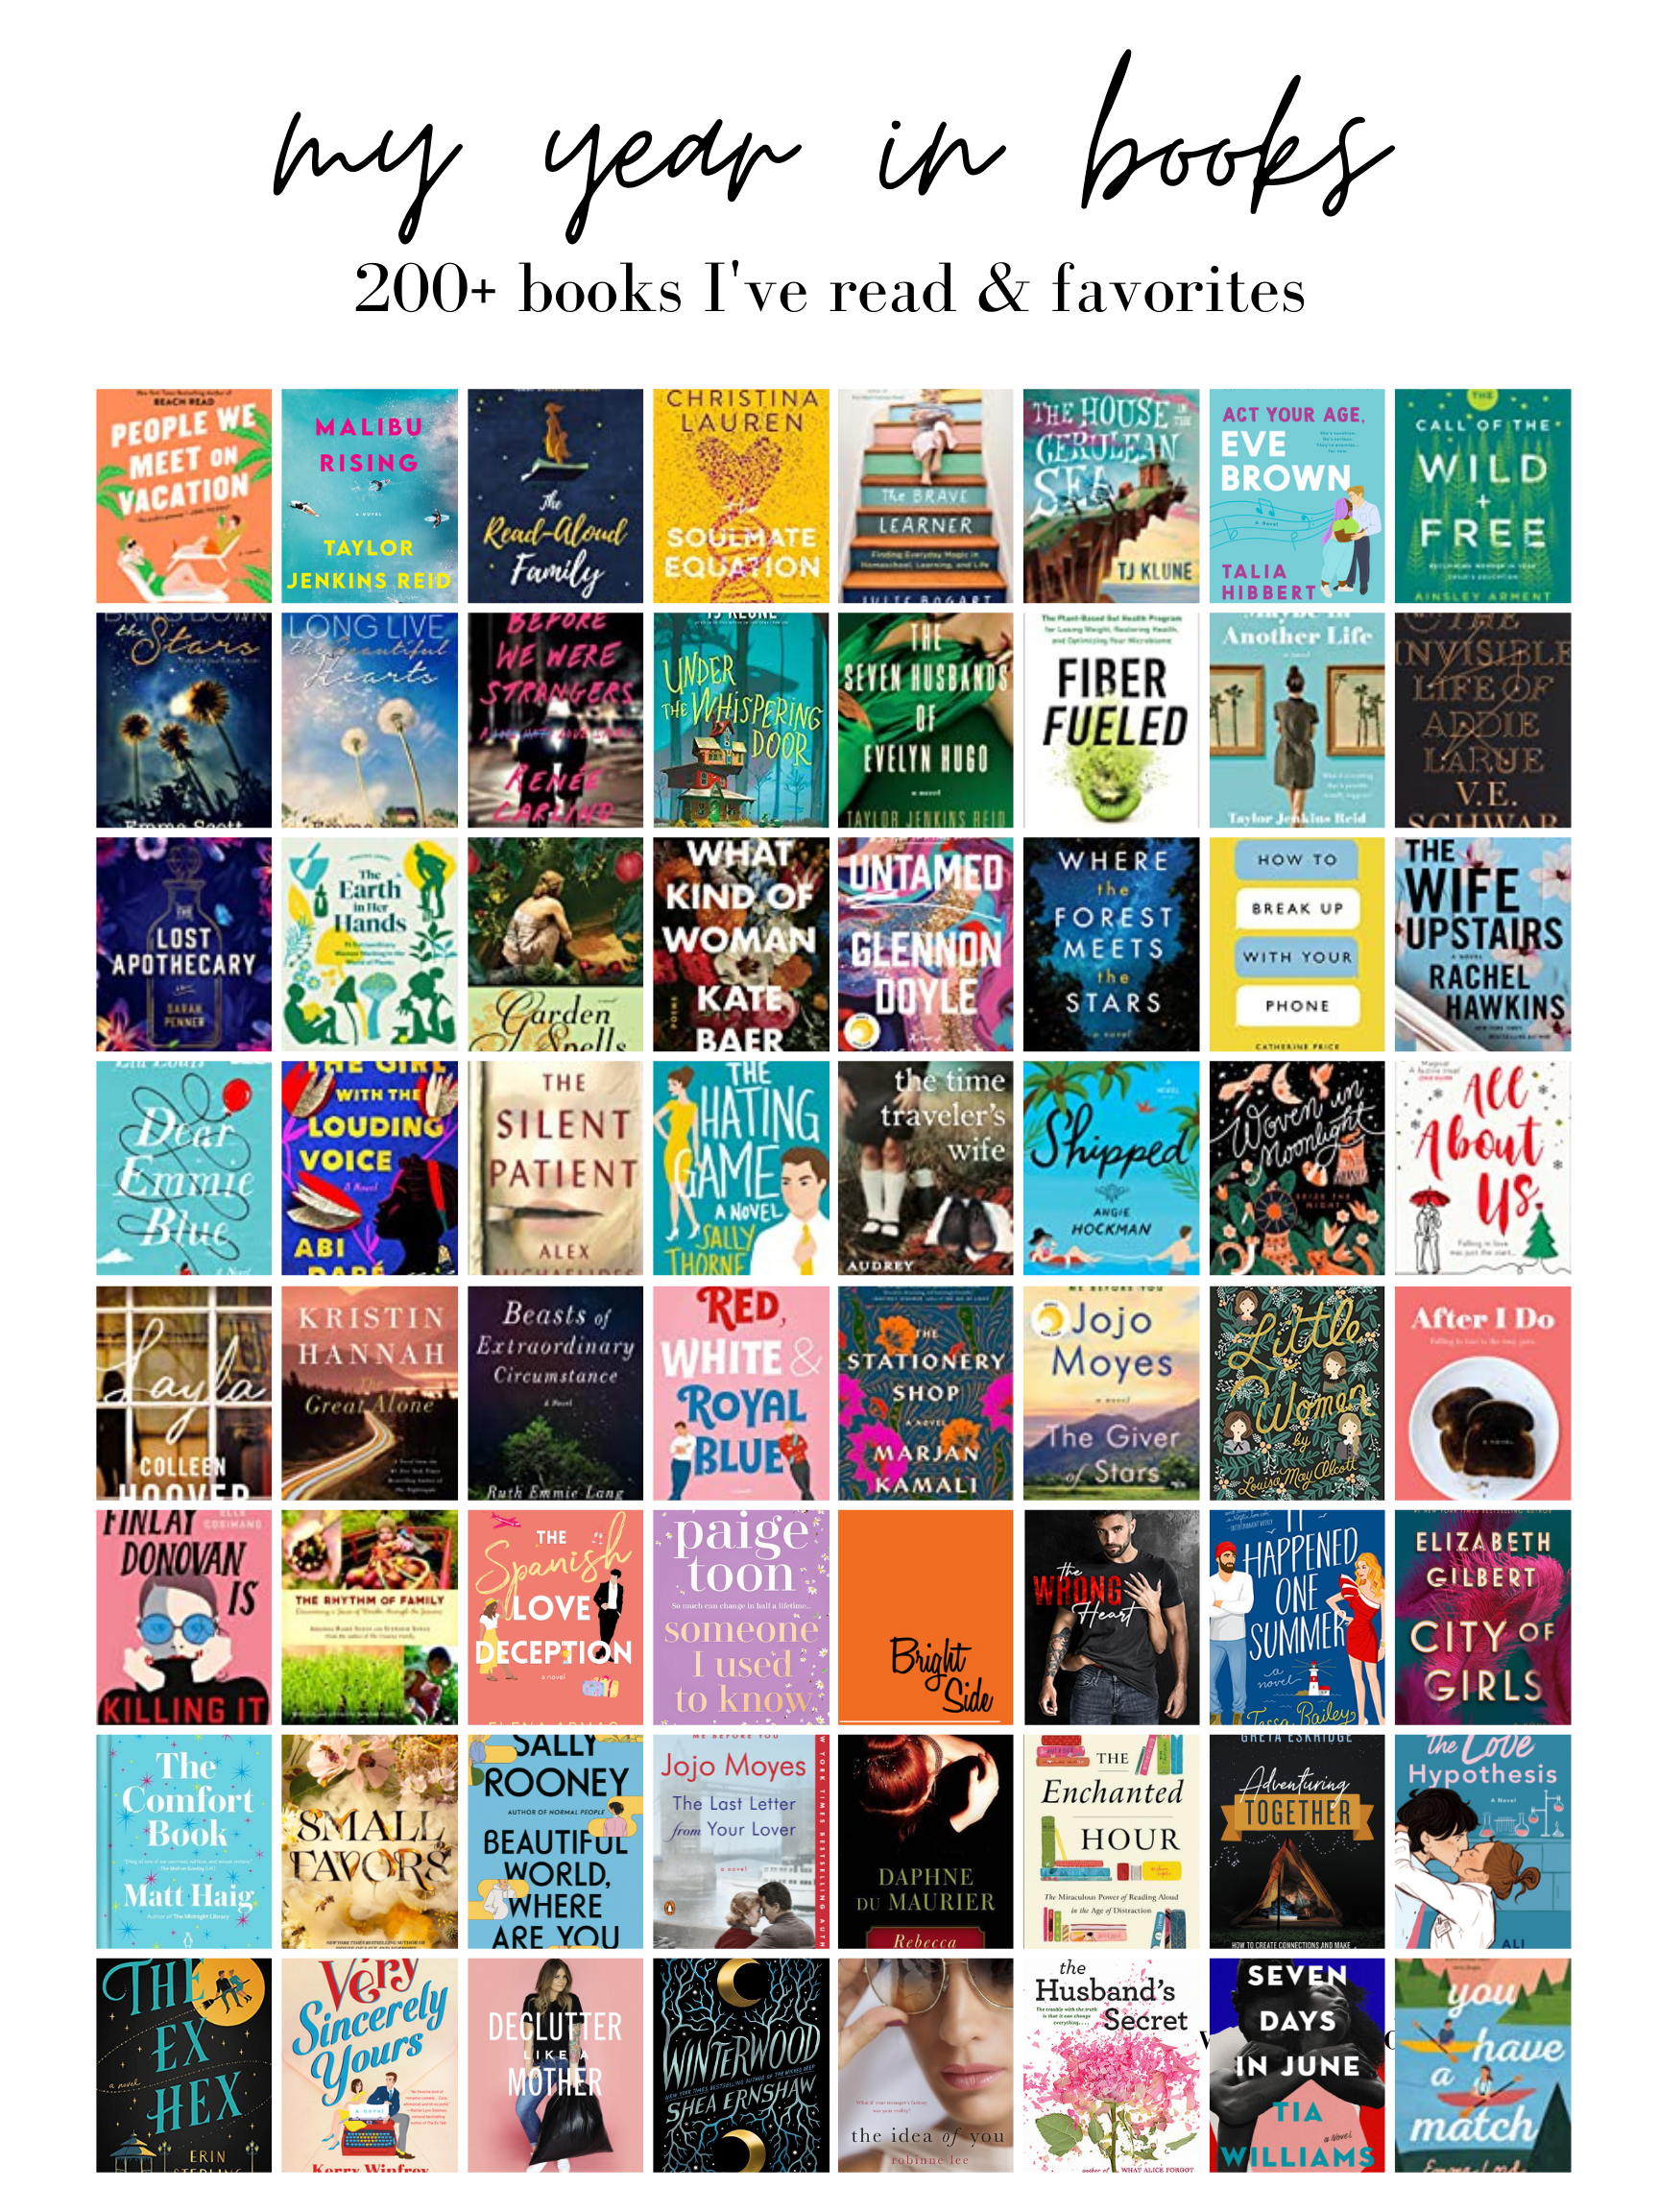 My Year in Books: What I've Read & Favorites